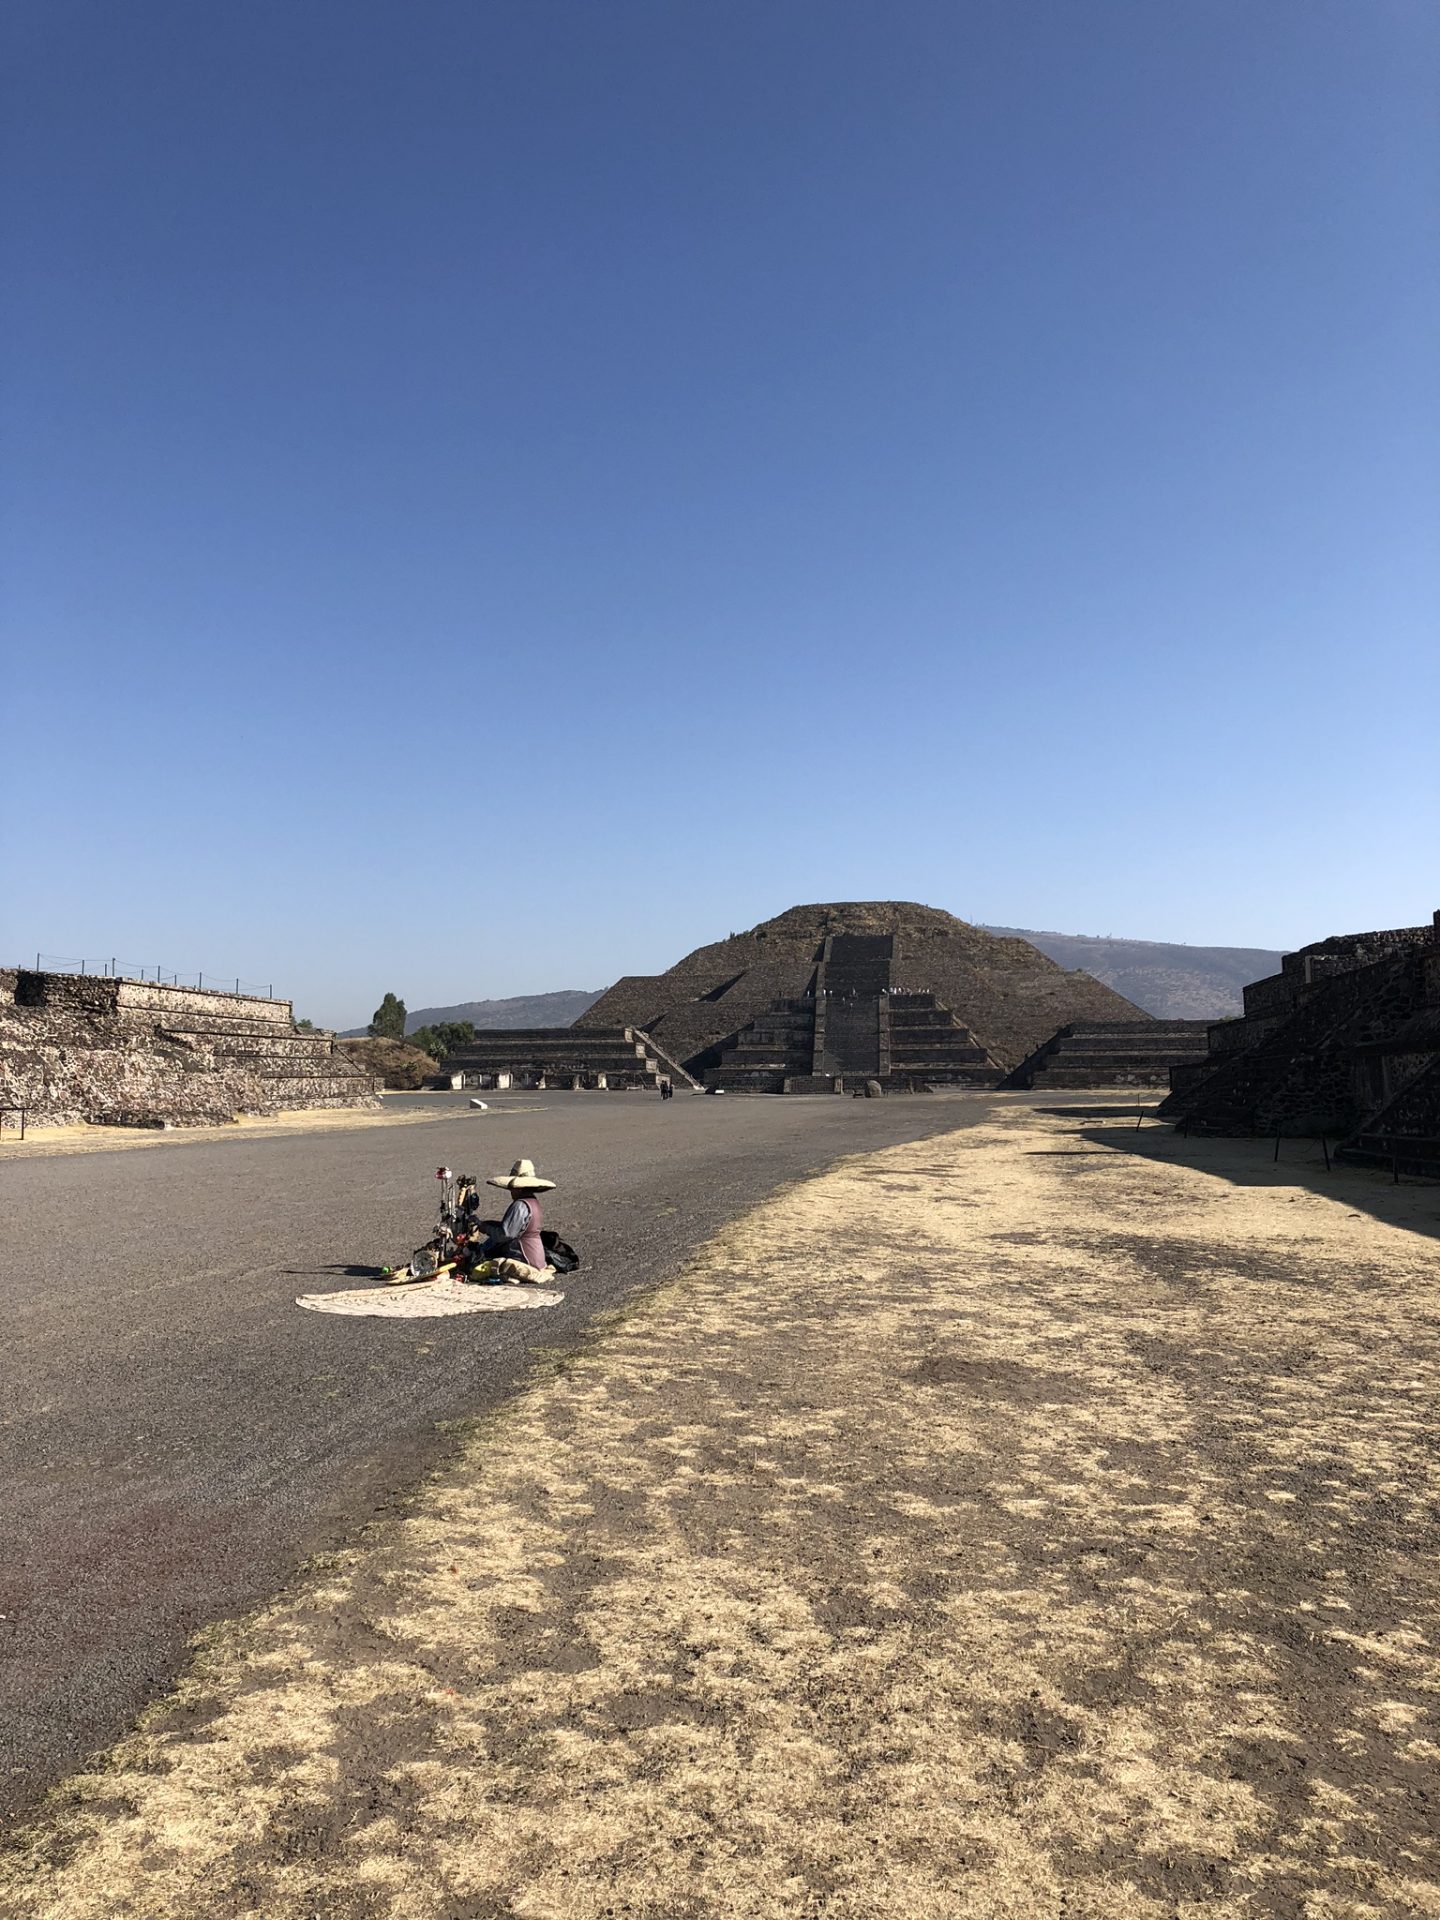 Avenue of the Dead, Teotihuacan